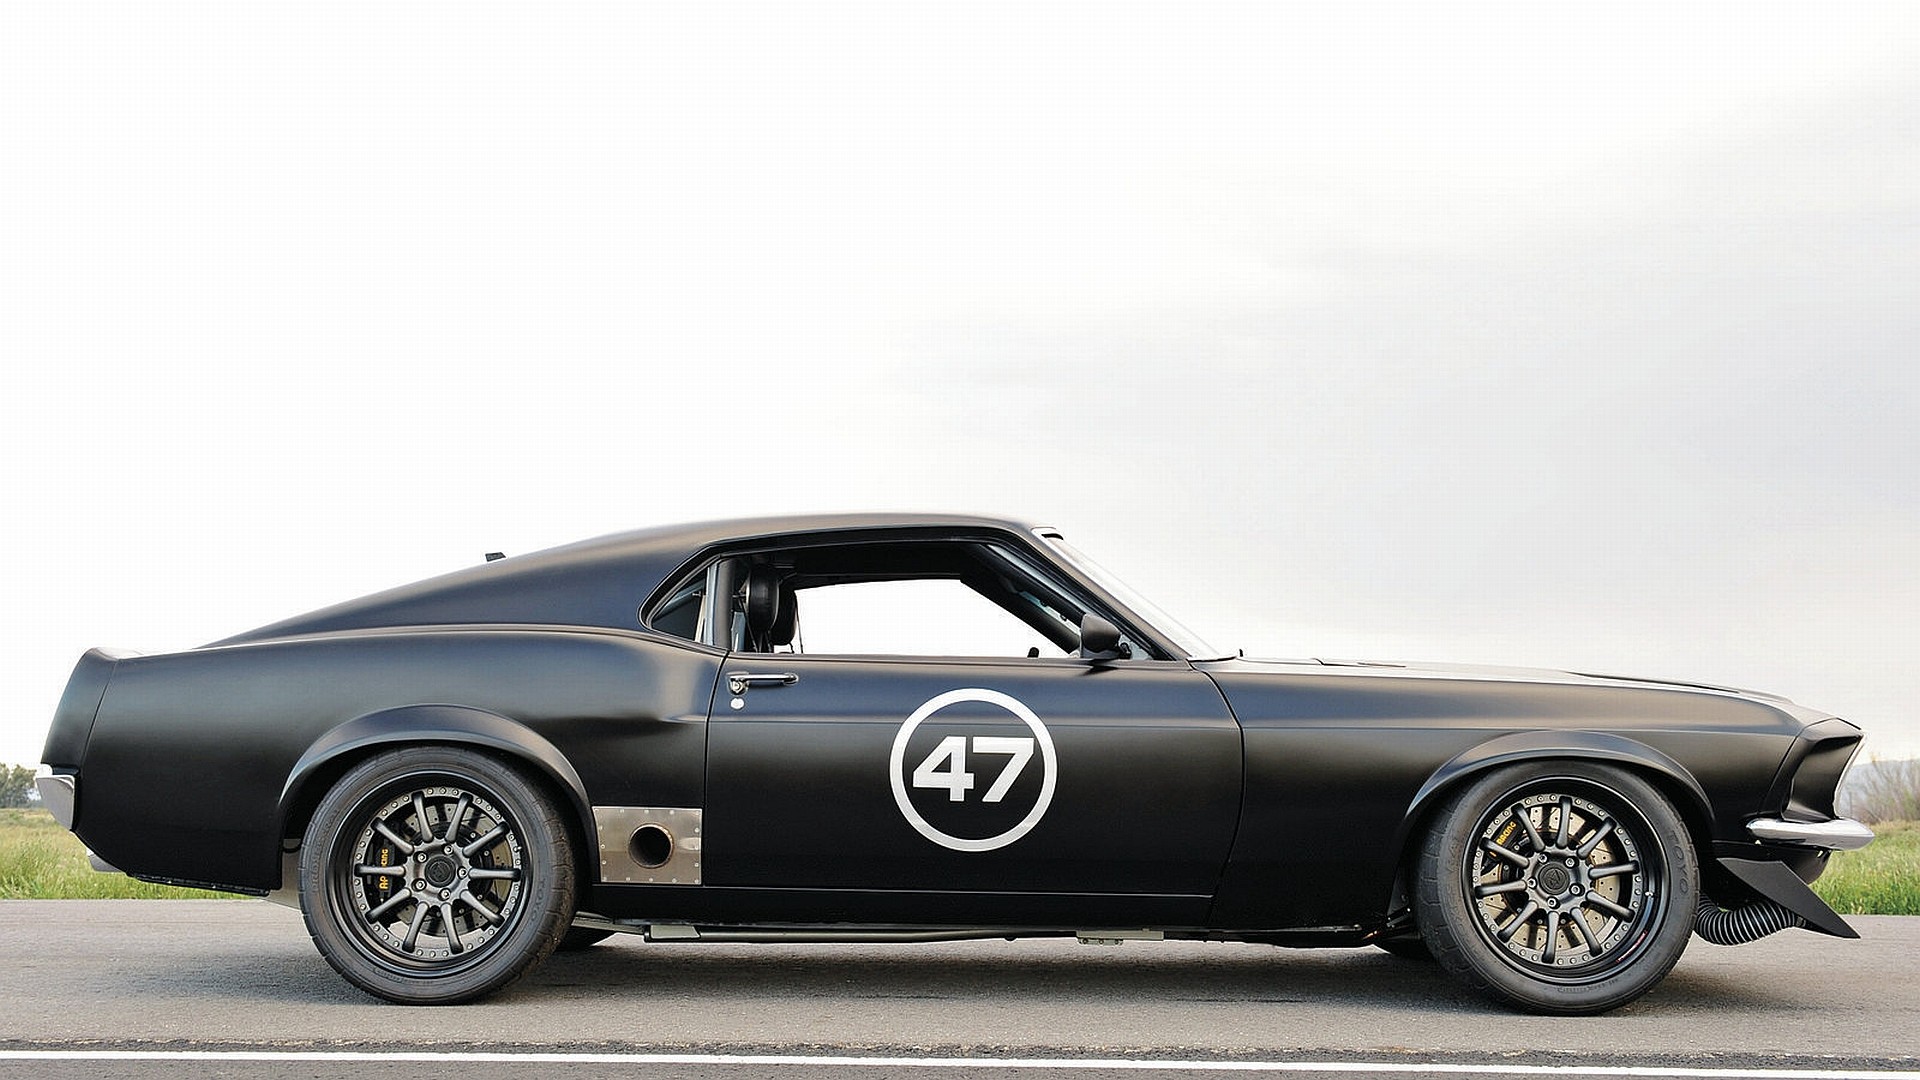 General 1920x1080 car Ford Mustang black cars vehicle Ford muscle cars American cars side view